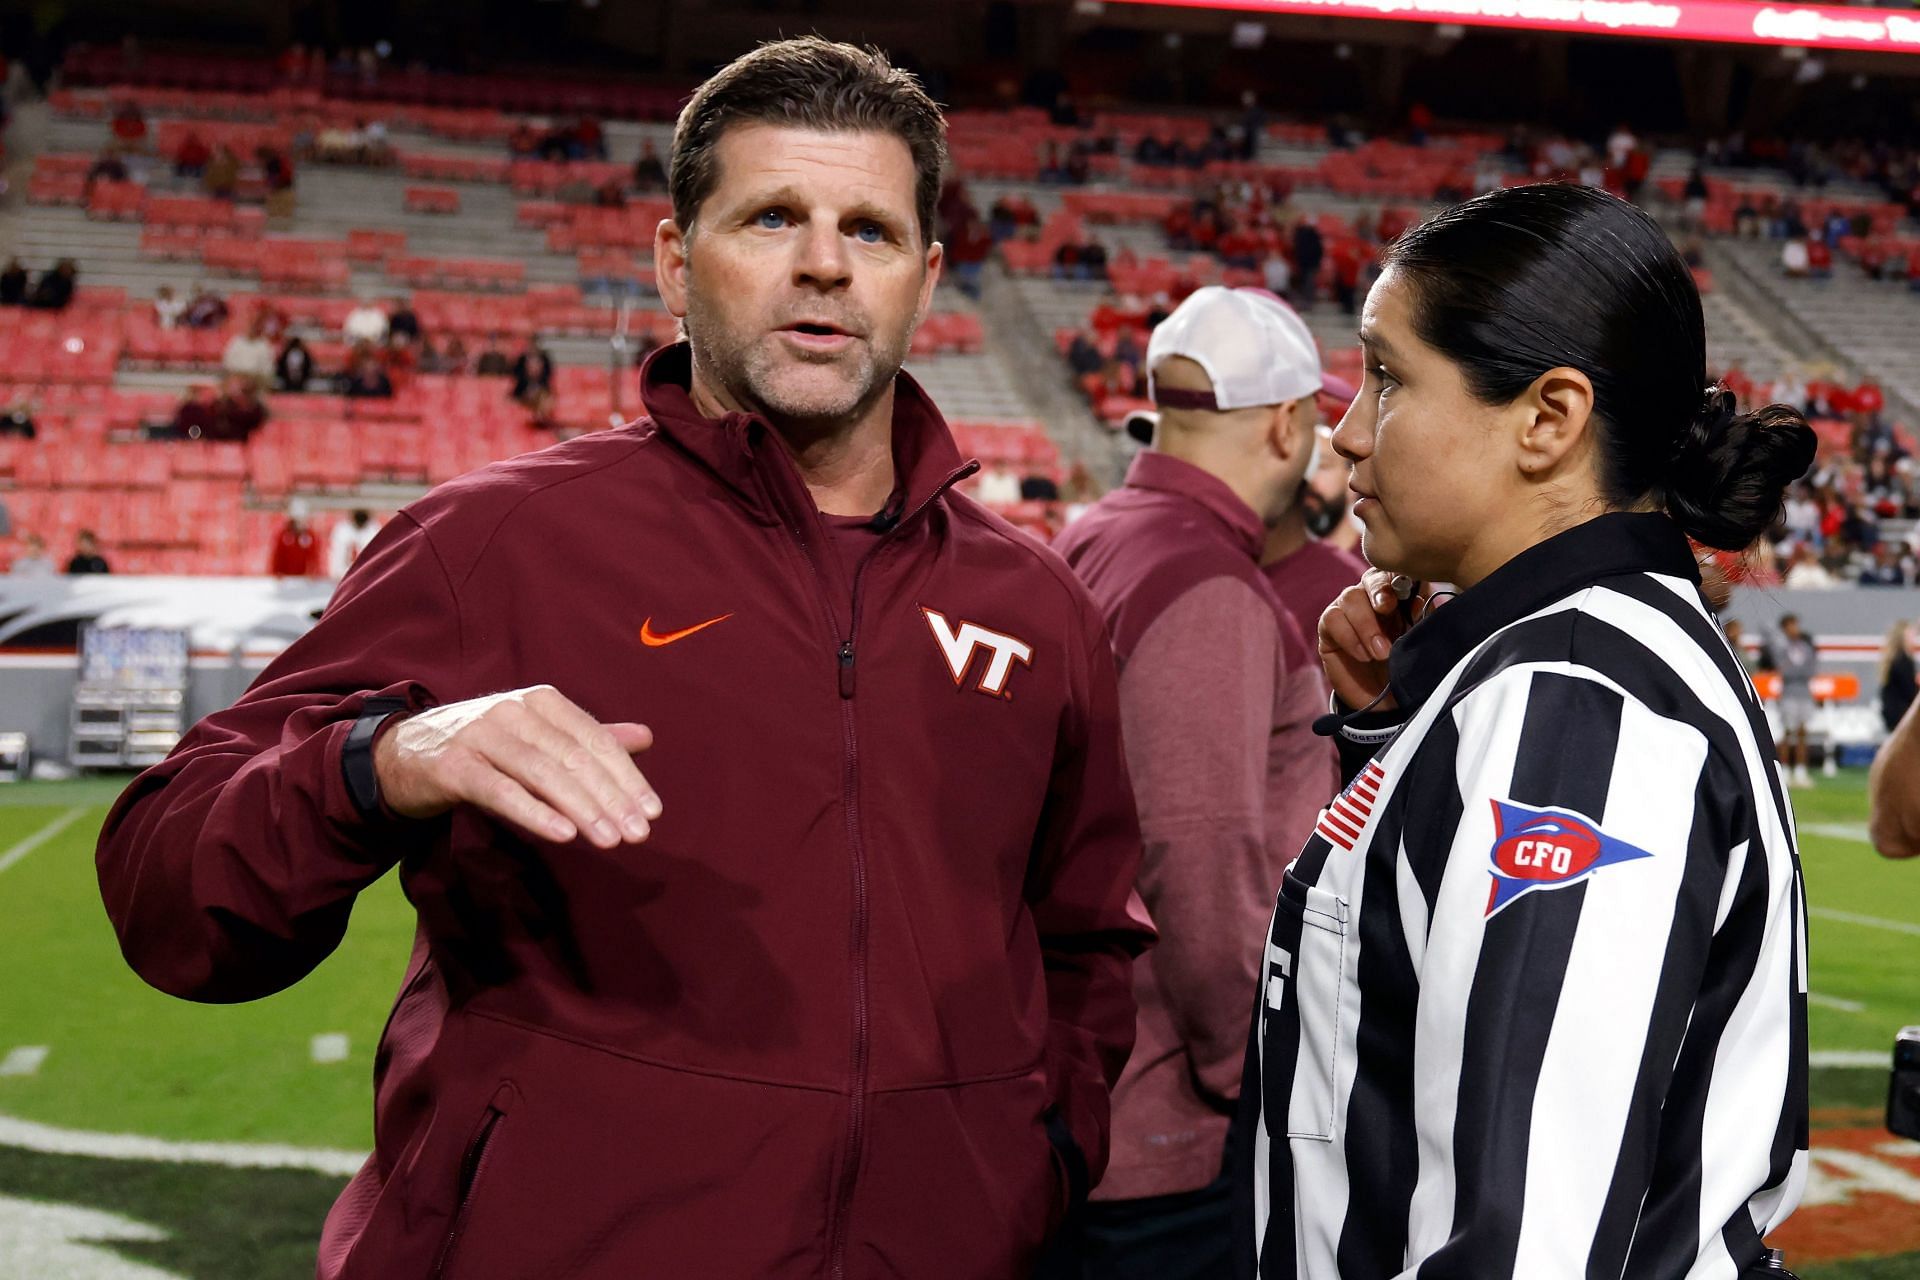 Head coach Brent Pry of the Virginia Tech Hokies talks with field judge Karina Tovar before the game against the North Carolina State Wolfpack